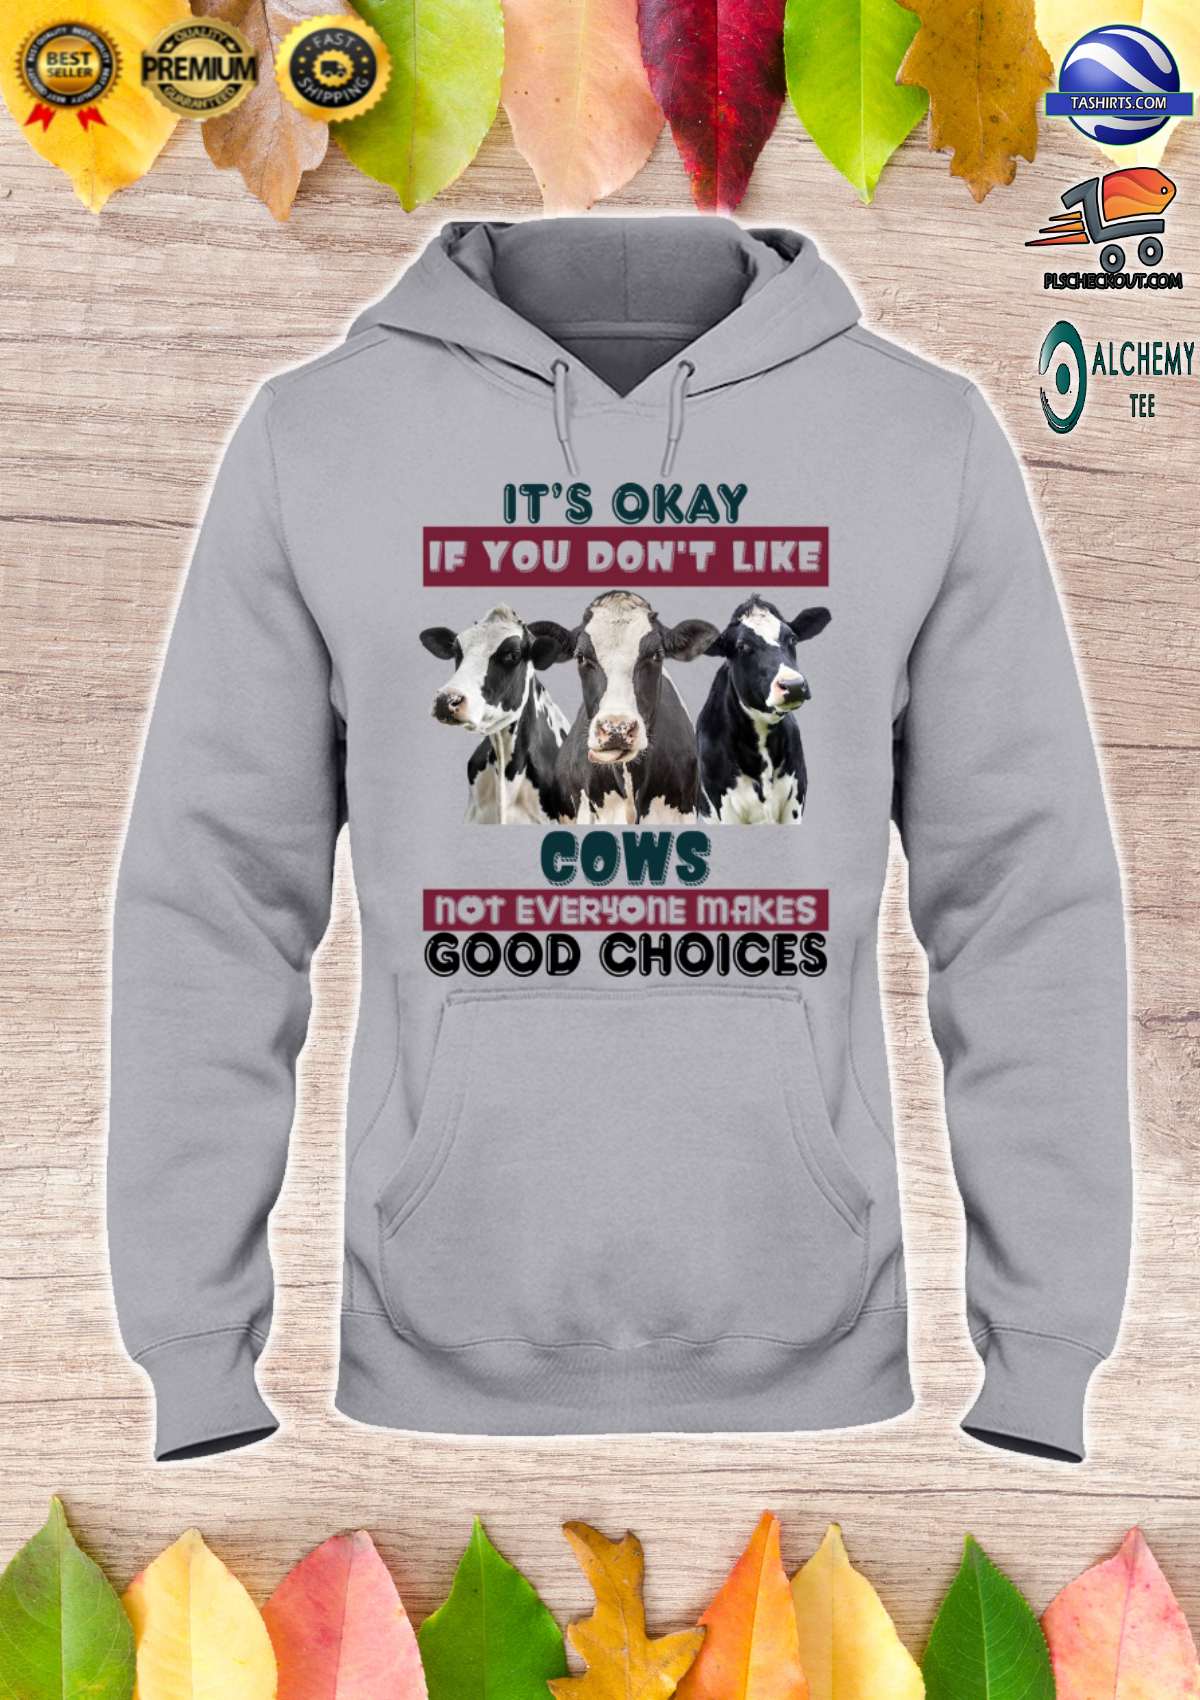 It’s okay if you don’t like cows not everyone makes good choices shirt